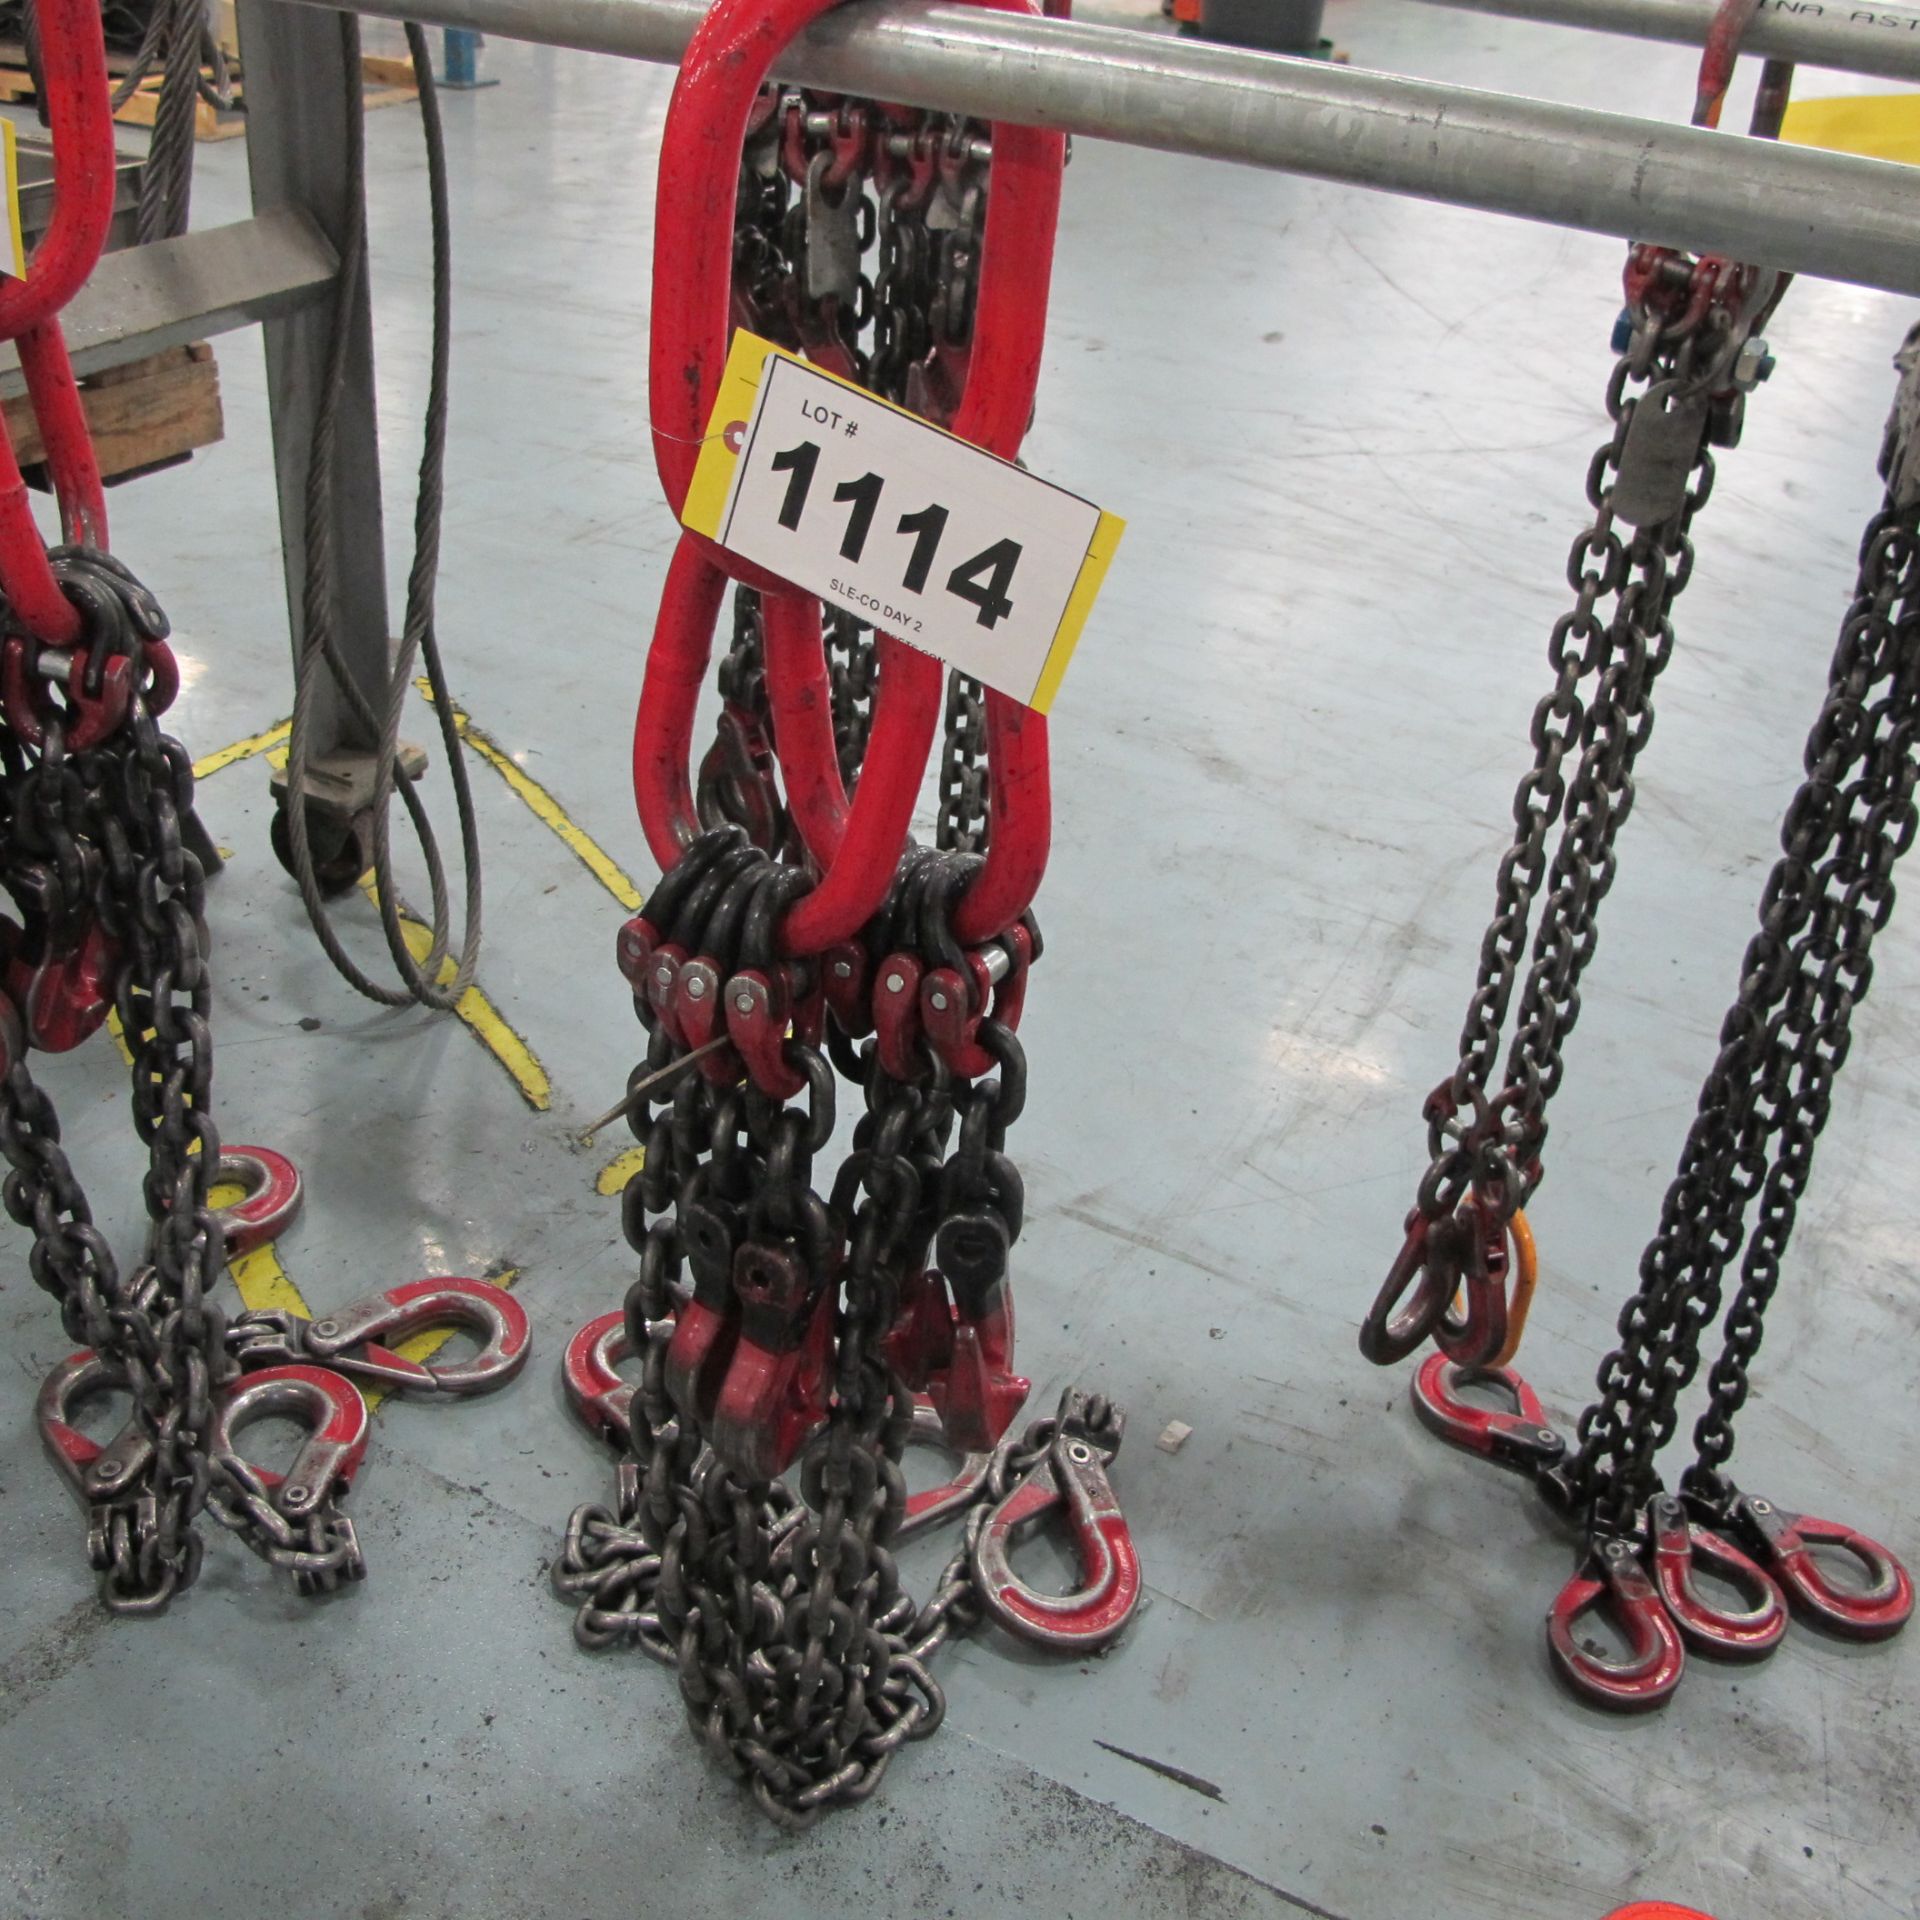 6'3" RIGGING CHAIN WITH 6 HOOKS, 18,000LB CAP